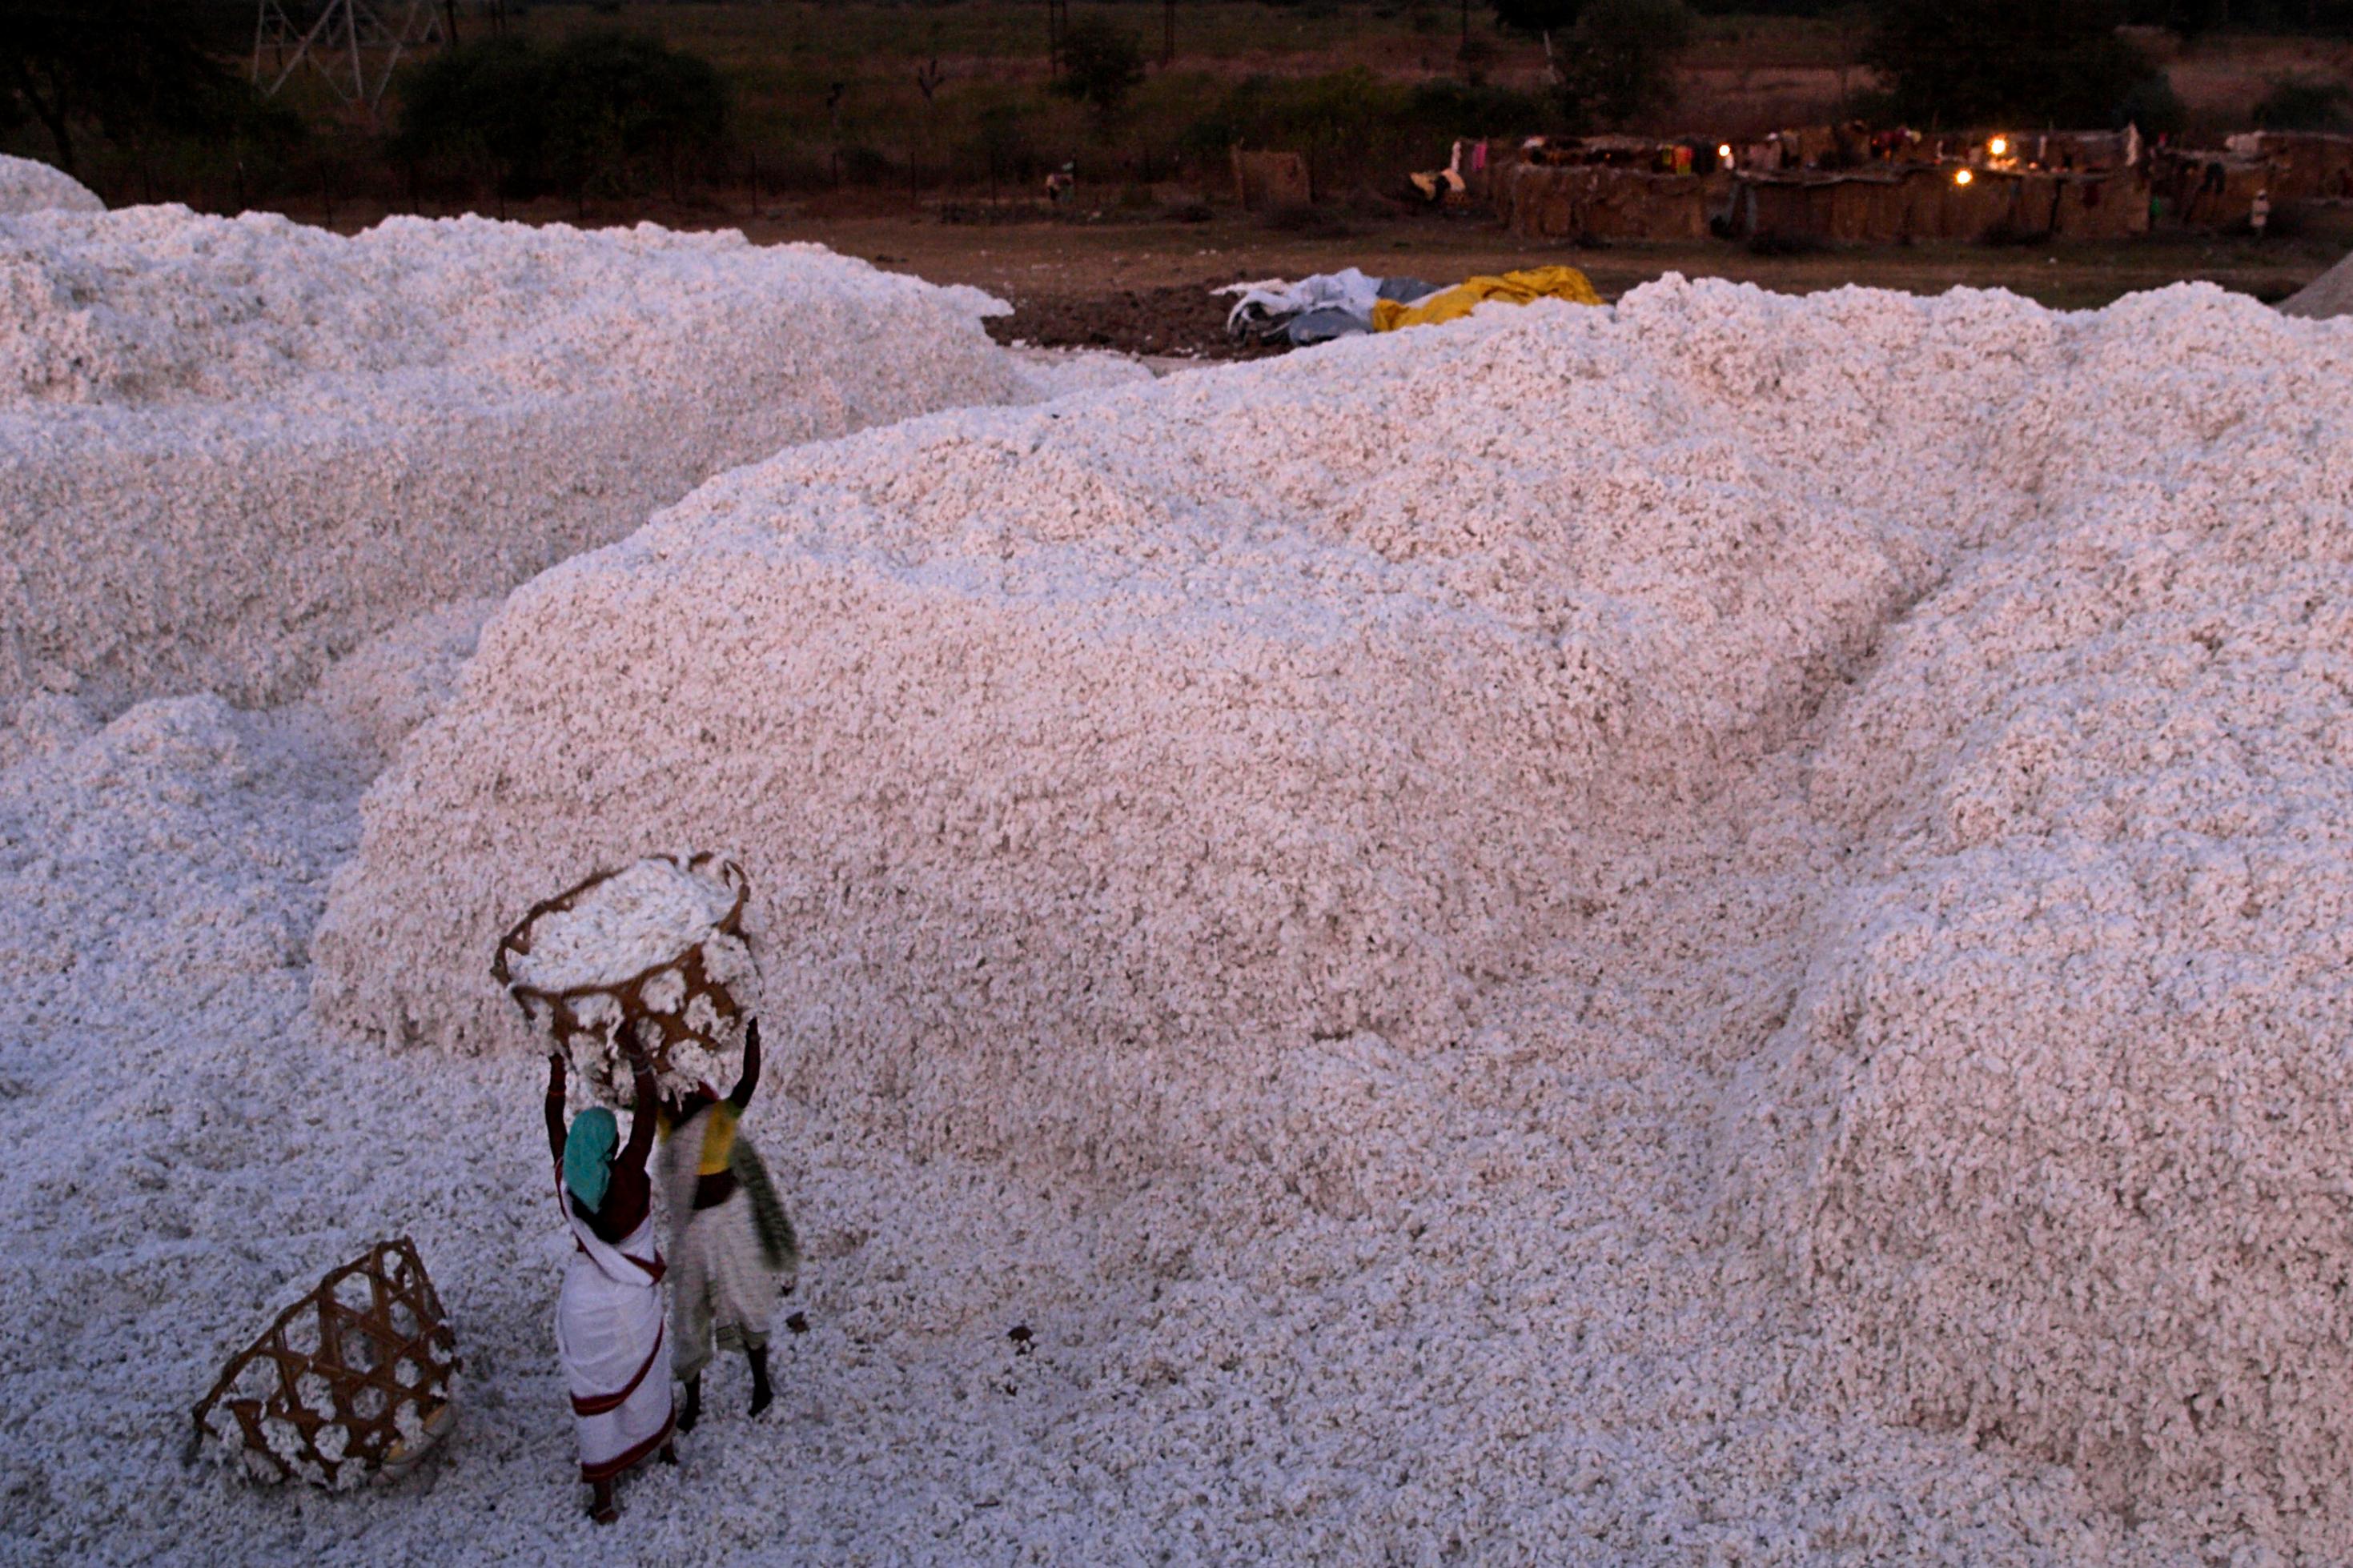 Workers build up big mountains of cotton at a ginning in Pandarkawda, known as the cotton capital of Maharashtra. Many of the workers live just outside the ginning in little huts. Although the ginning itself becomes increasingly mechanized the preparing work is still very labor intensive, because the raw cotton arrives unsorted and is just dumped outside of the factory.